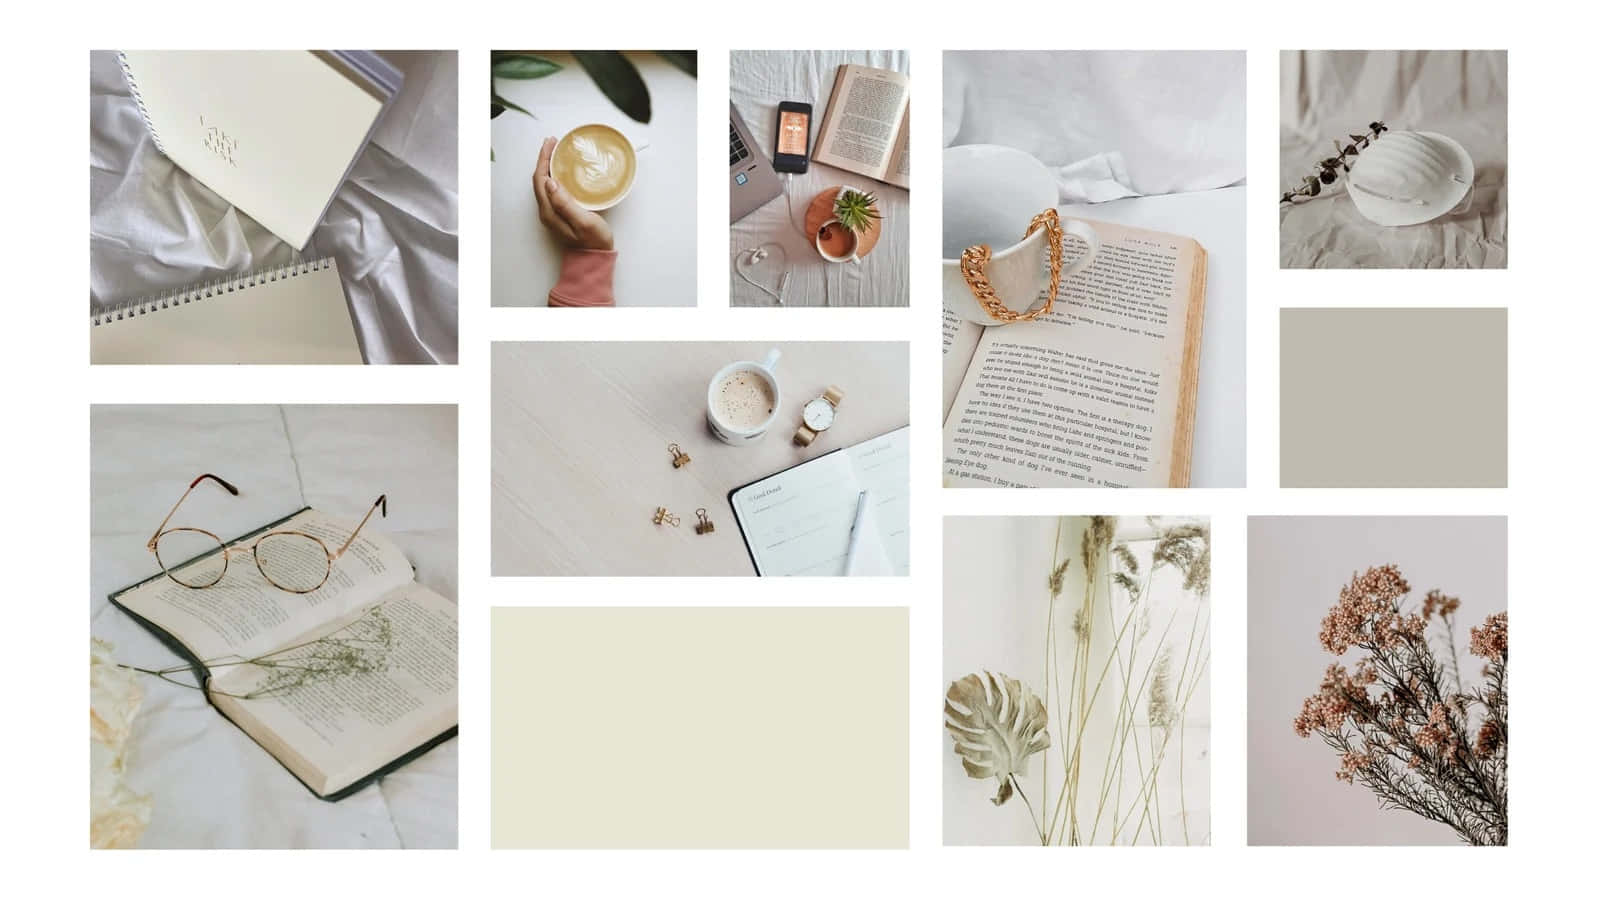 A Collage Of Photos With Books, Flowers And Other Items